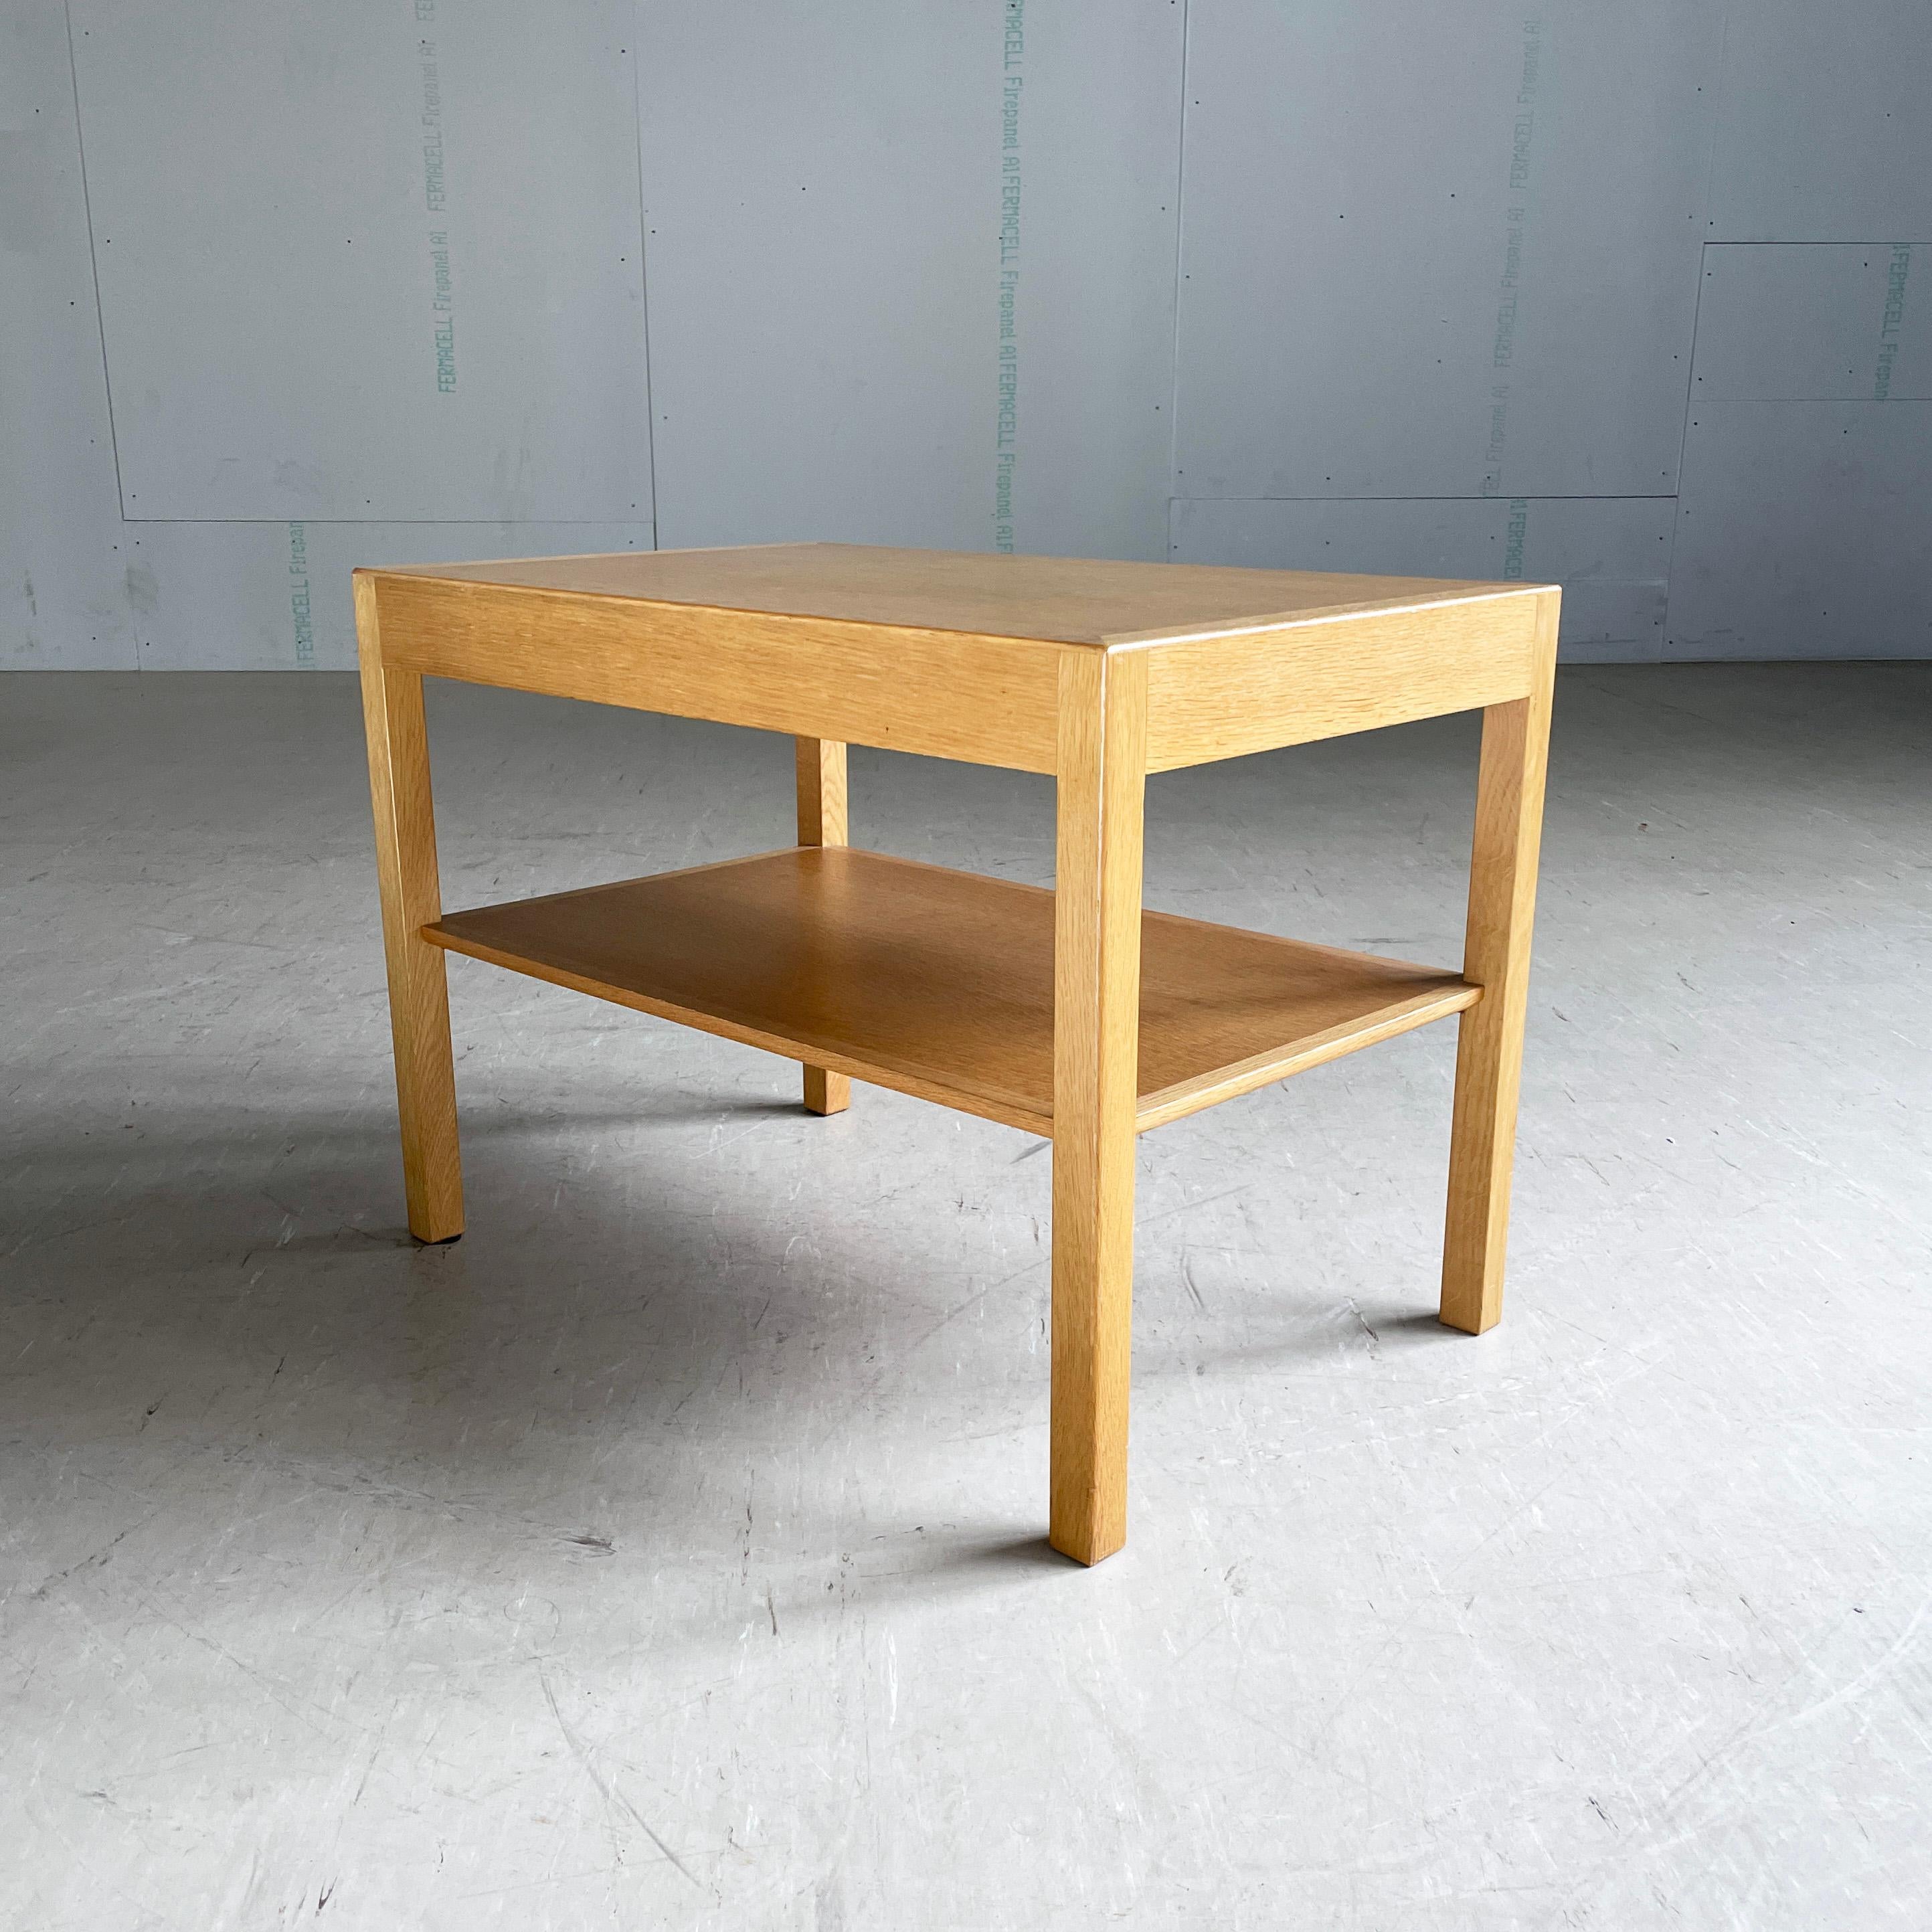 Mid Century Danish oak side table designed by Hans J. Wegner. Produced by Andreas Tuck, Denmark. Beautifully made oak tabletop with lower magazine shelf
Designer: Hans J. Wegner
Producer: Andreas Tuck, Denmark (with Production Stamp)
Measurements: